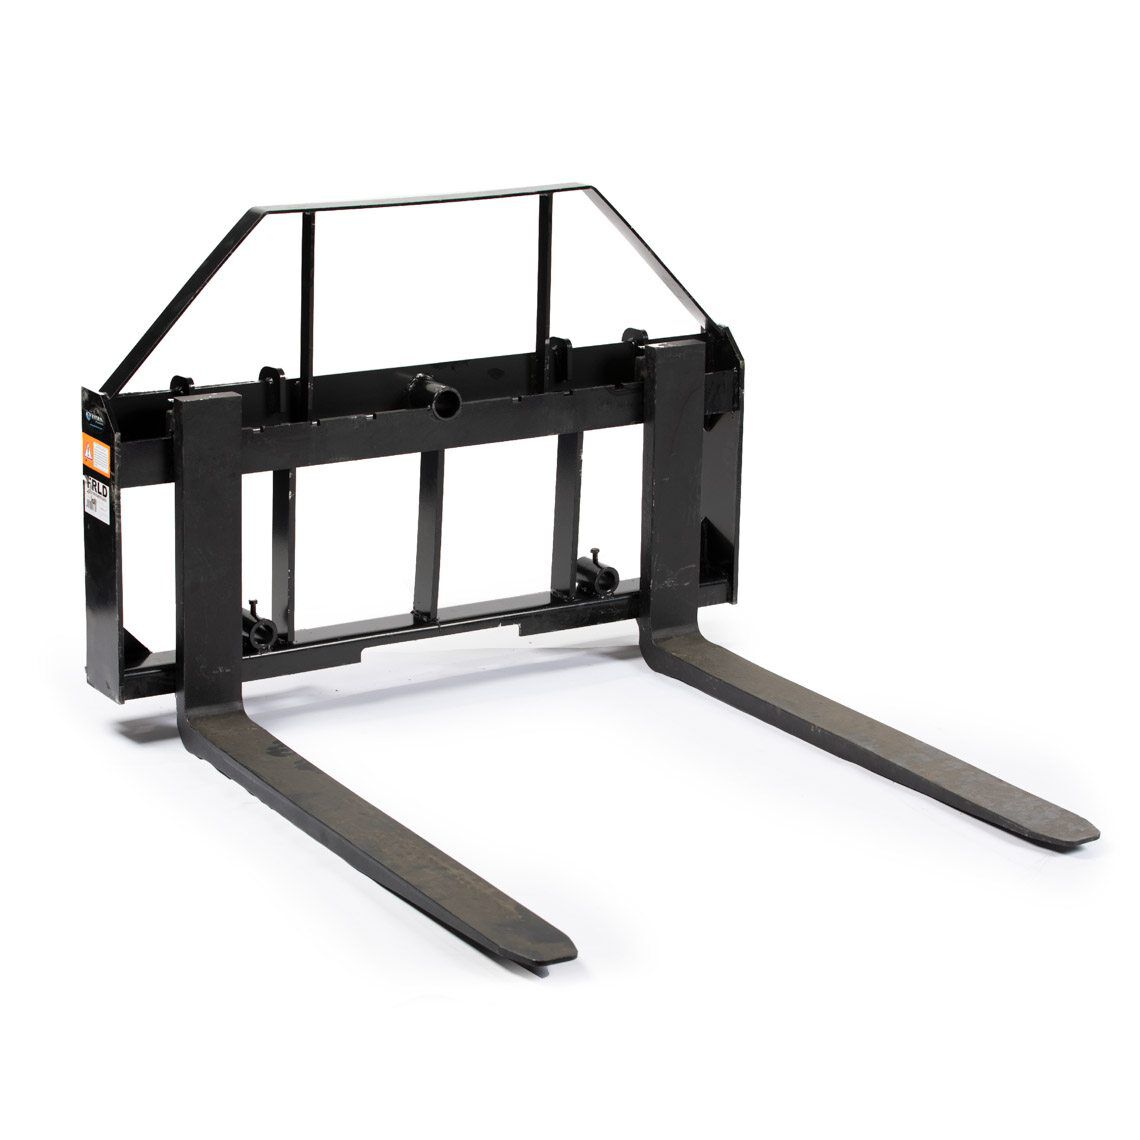 New 6' Hydraulic Sliding Pallet Fork Skid Steer Attachment *FREE SHIPPING* 